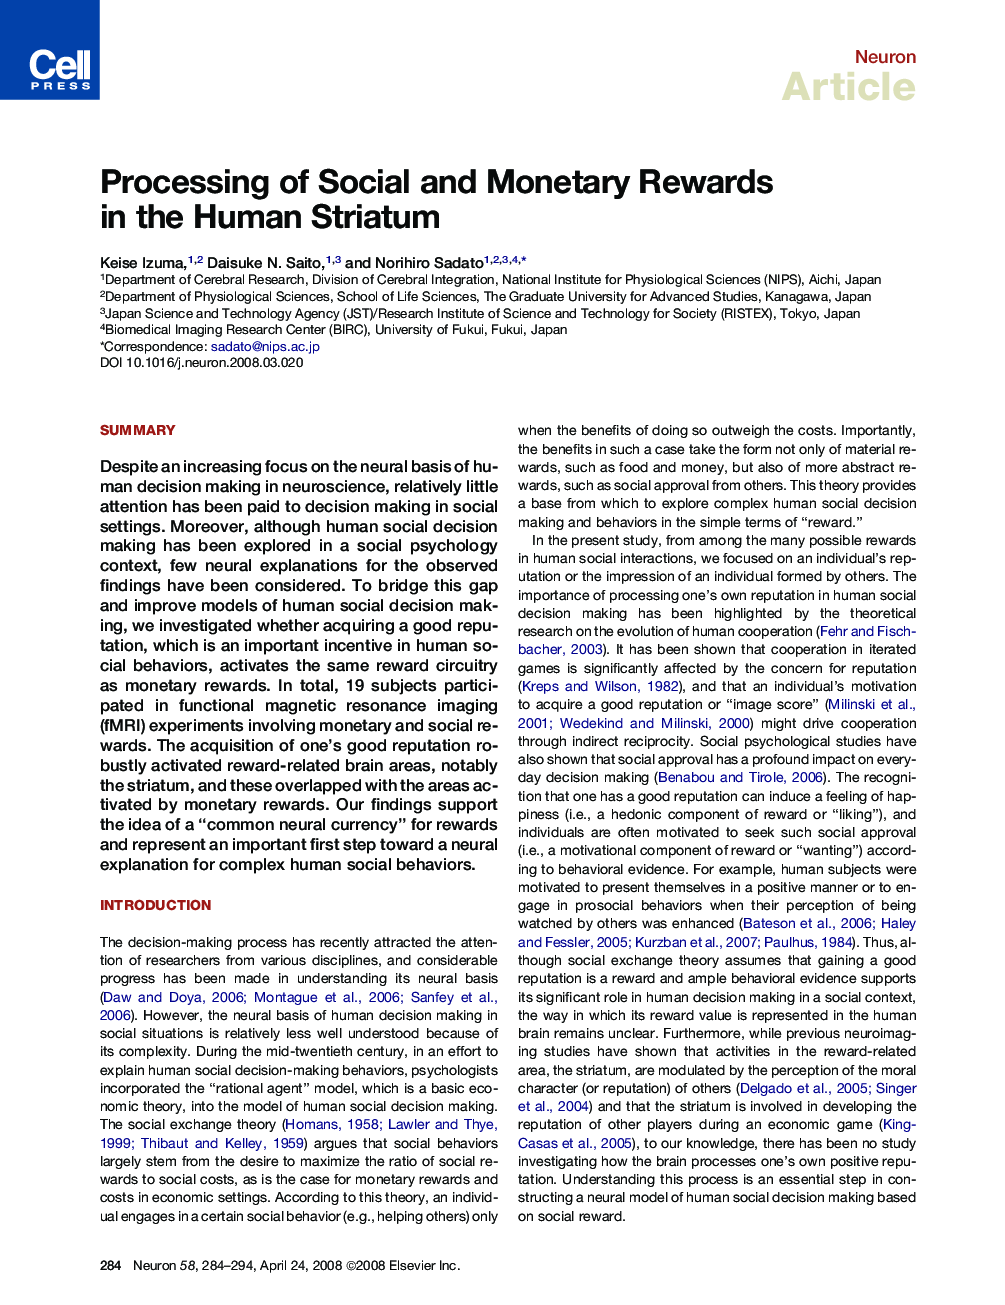 Processing of Social and Monetary Rewards in the Human Striatum